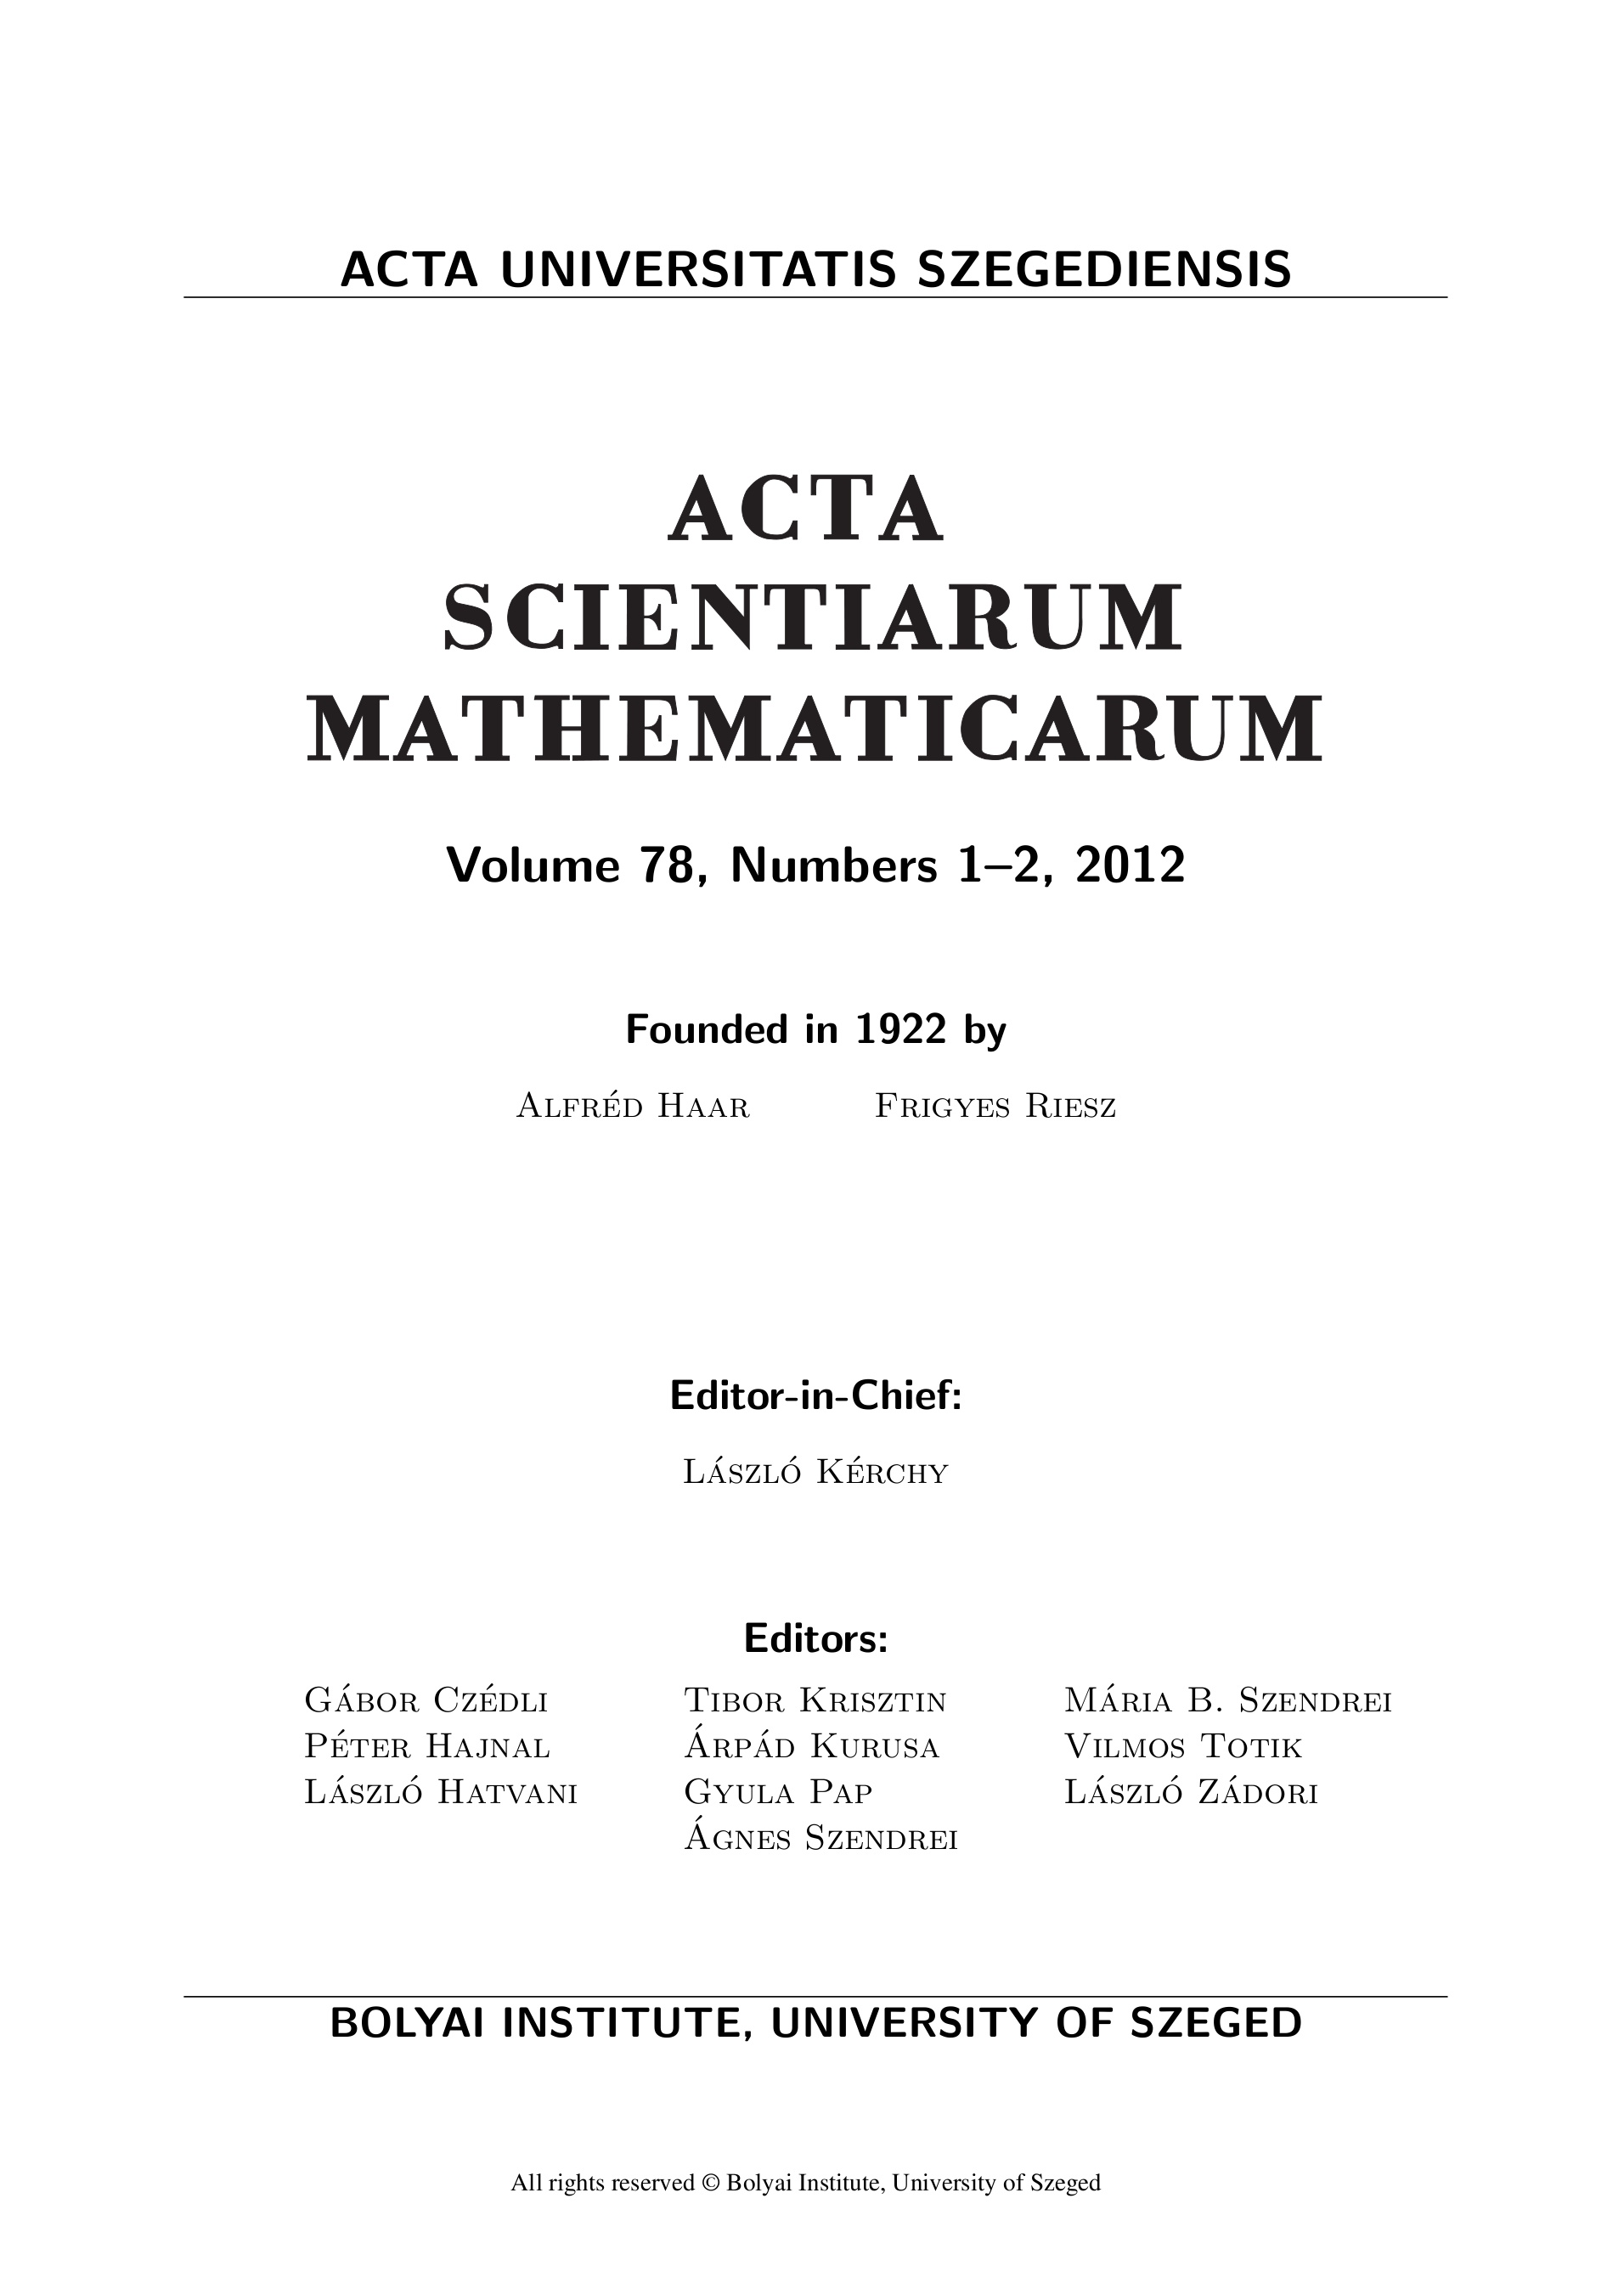 Acta Sci. Math. cover now